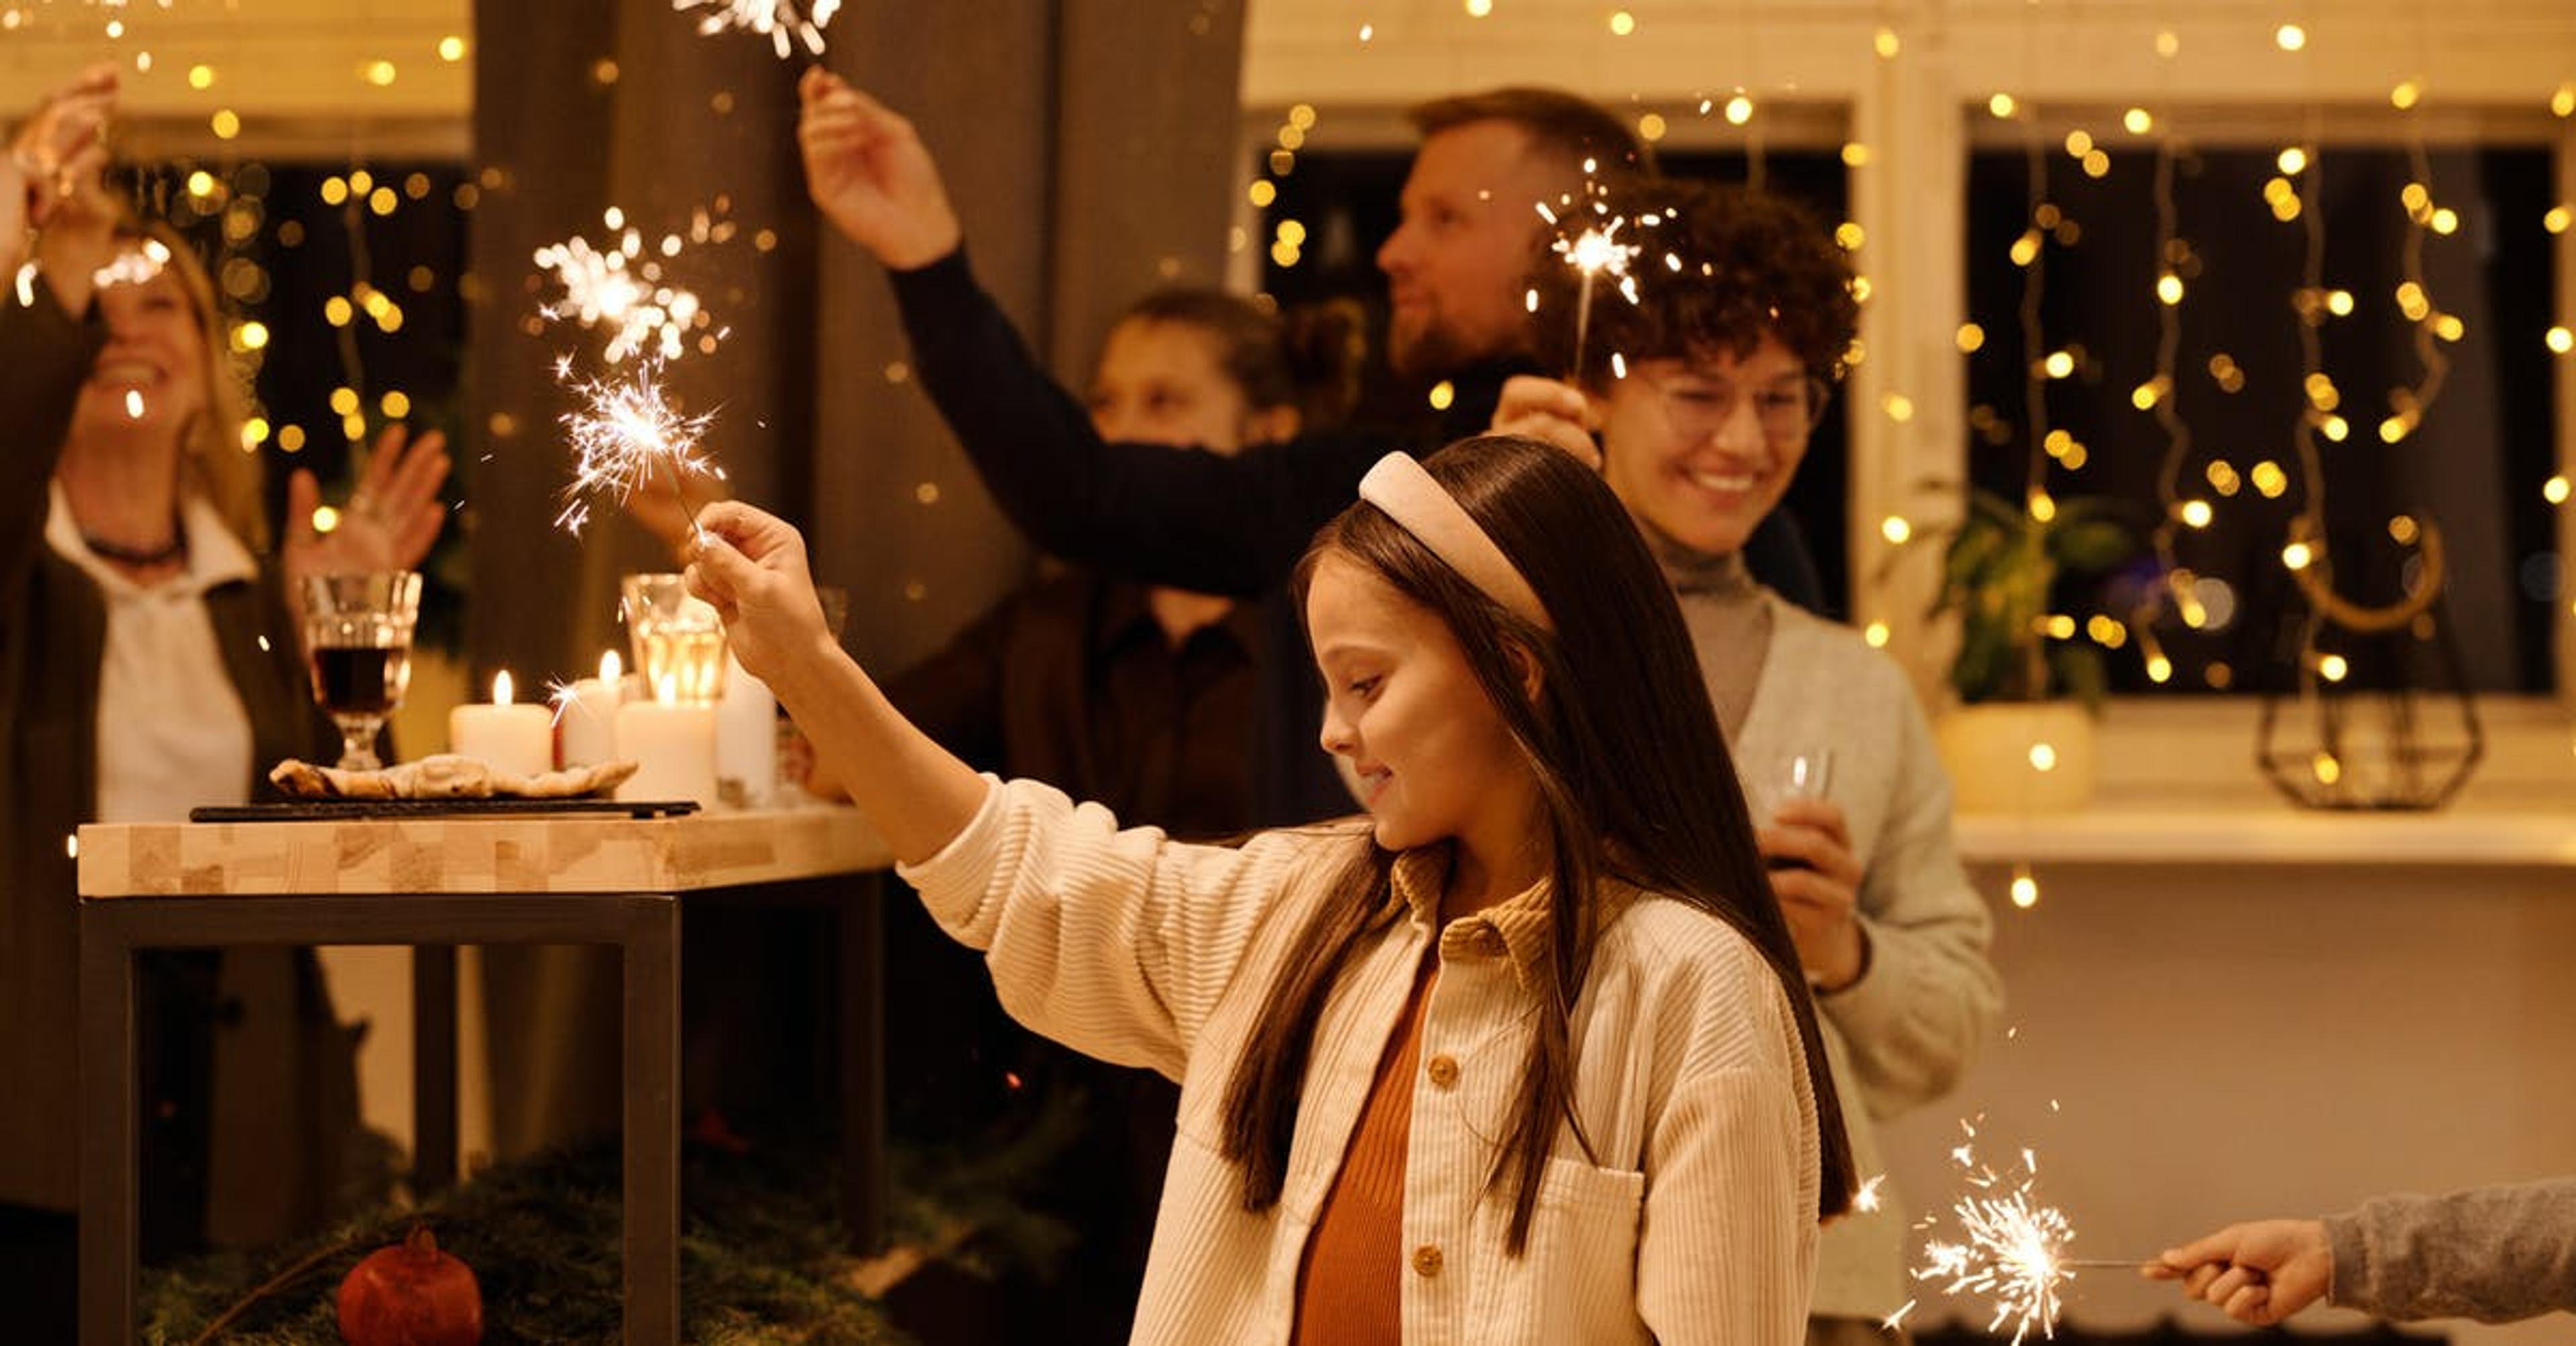 A young girl holds up a sparkler at a New Year's Eve party